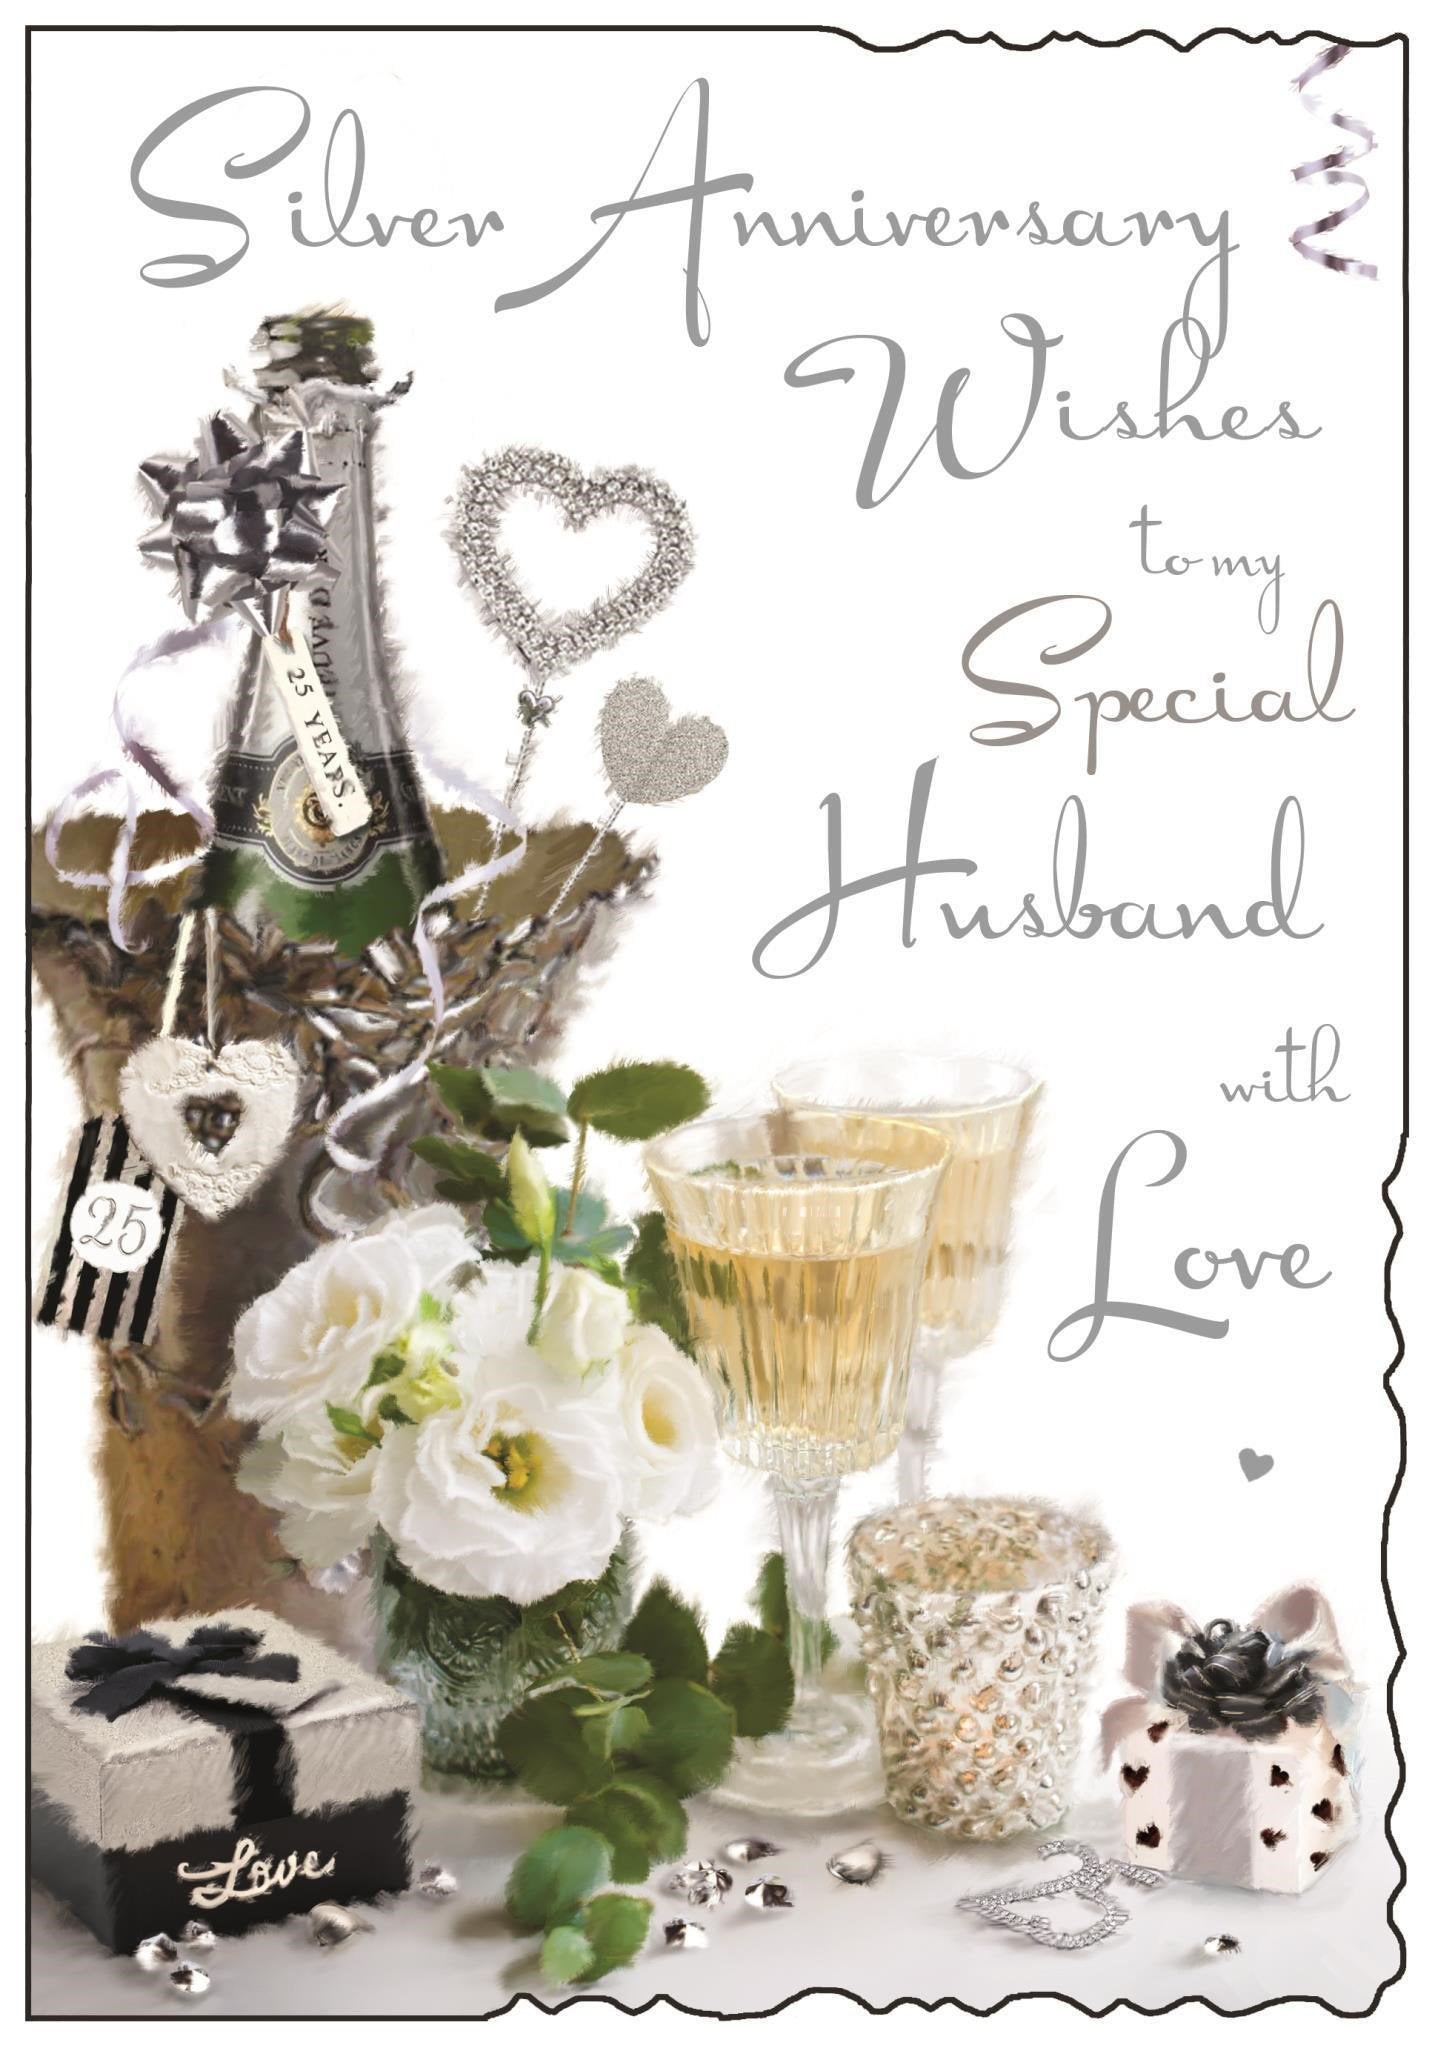 Front of Special Husband Silver Anniversary Greetings Card